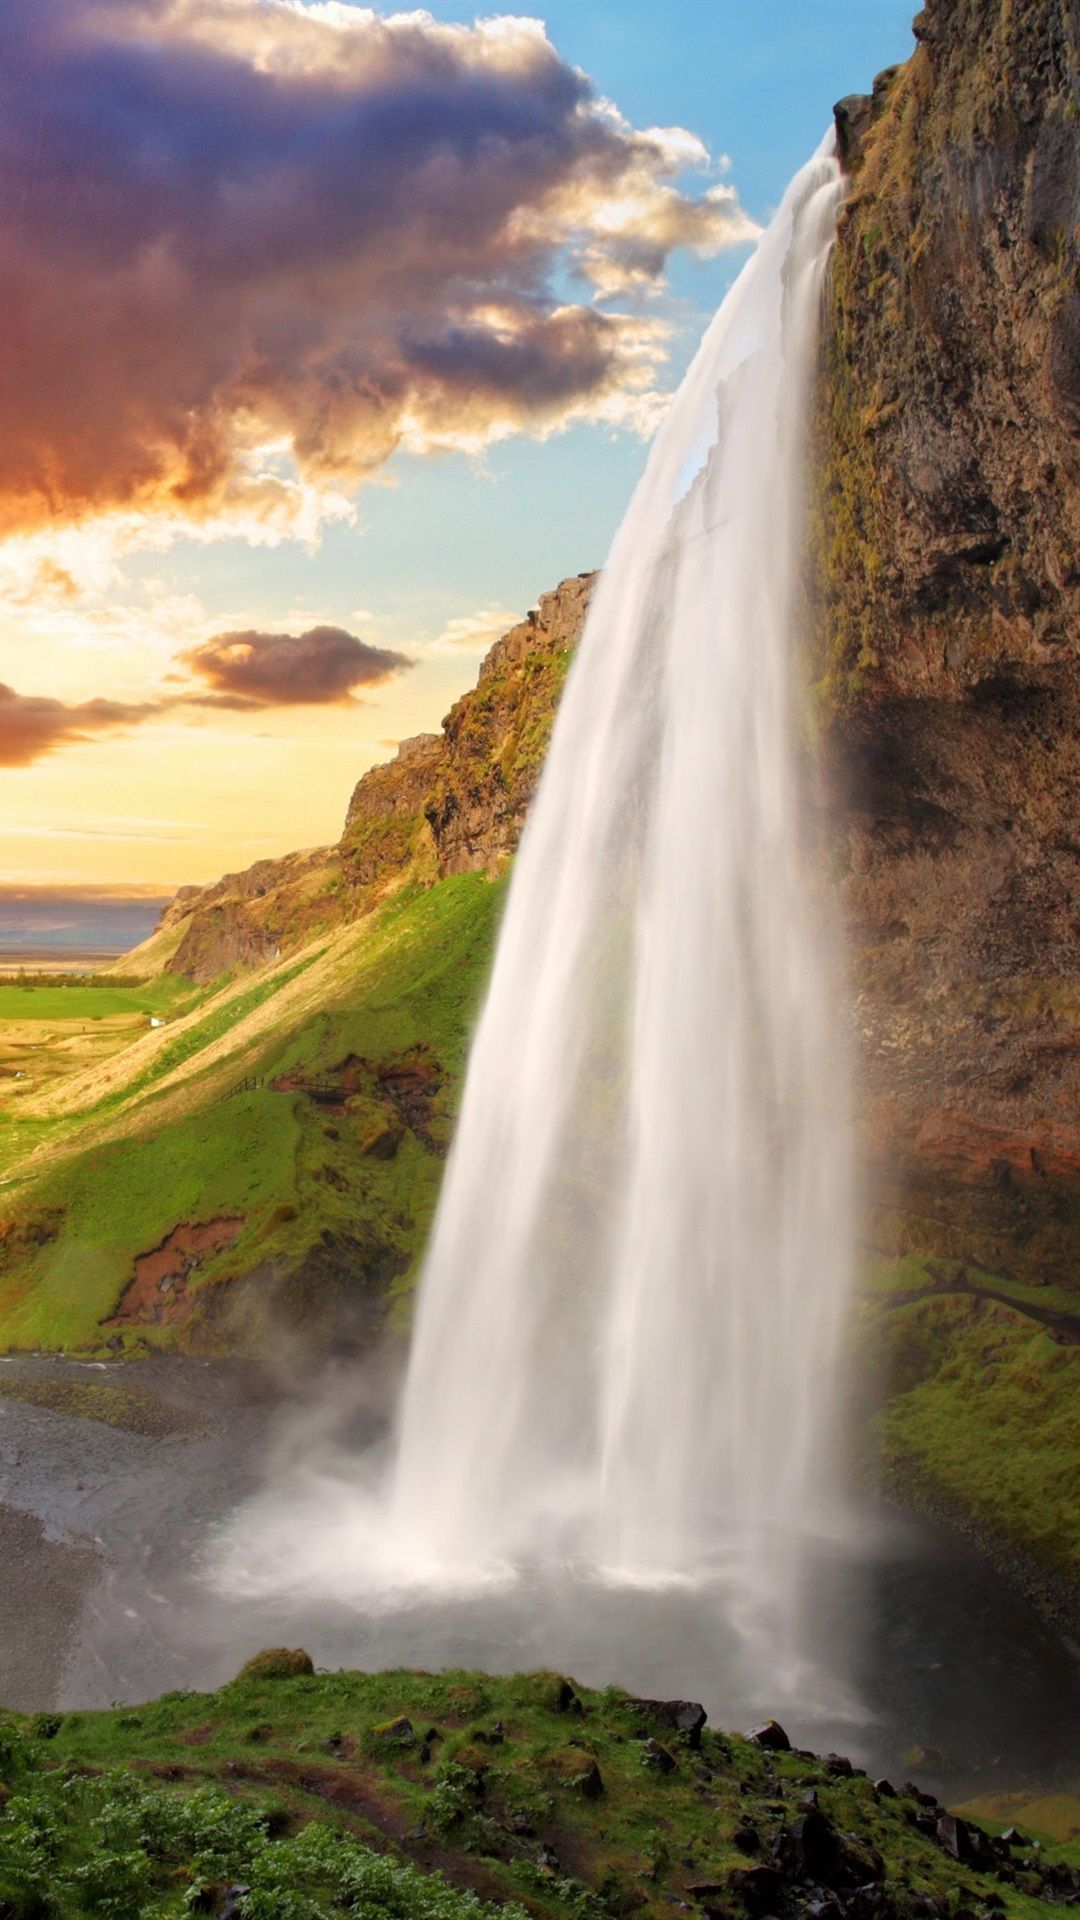 Iceland, Seljalandsfoss, Waterfall, River, Field, Sunset 1080x1920 IPhone 8 7 6 6S Plus Wallpaper, Background, Picture, Image